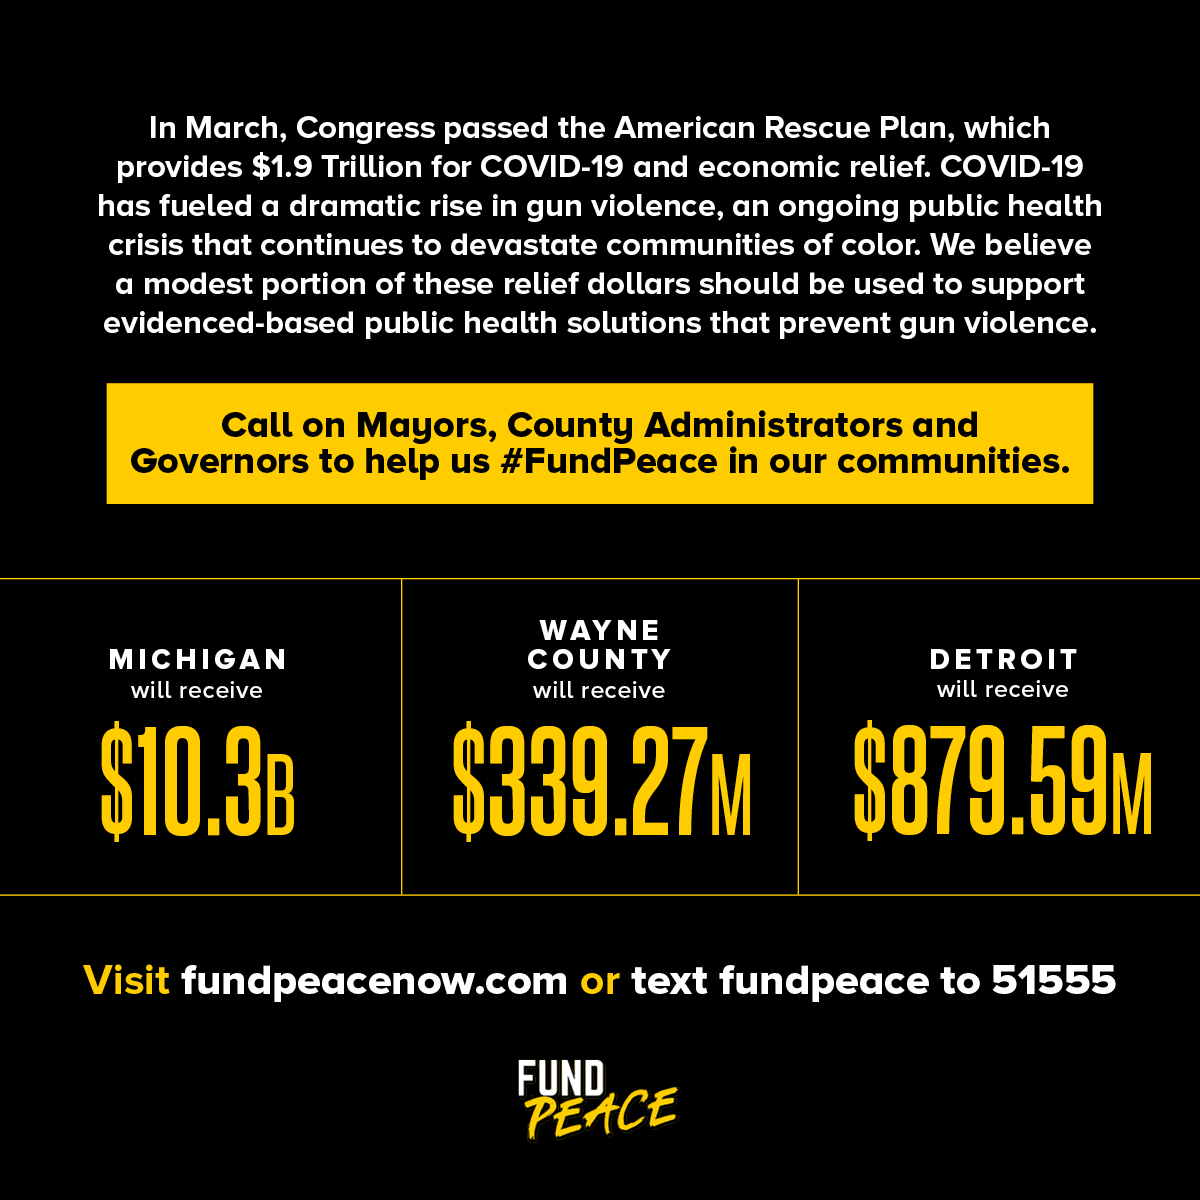  In March, Congress passed the American Rescue Plan, which provides $1.9 Trillion for COVID-19 and economic relief. COVID-19 has fueled a dramatic rise in gun violence, an ongoing public health crisis that continues to devastate communities of color. We believe a modest portion of these relief dollars should be used to support evidenced-based public health solutions that prevent gun violence.  Call on Mayors, County Administrators and Governors to help us #FundPeace in out communities.  - Michigan will receive $10.3 billion. - Wayne County will receive $339.27 million. - Detroit will receive $879.59 million.